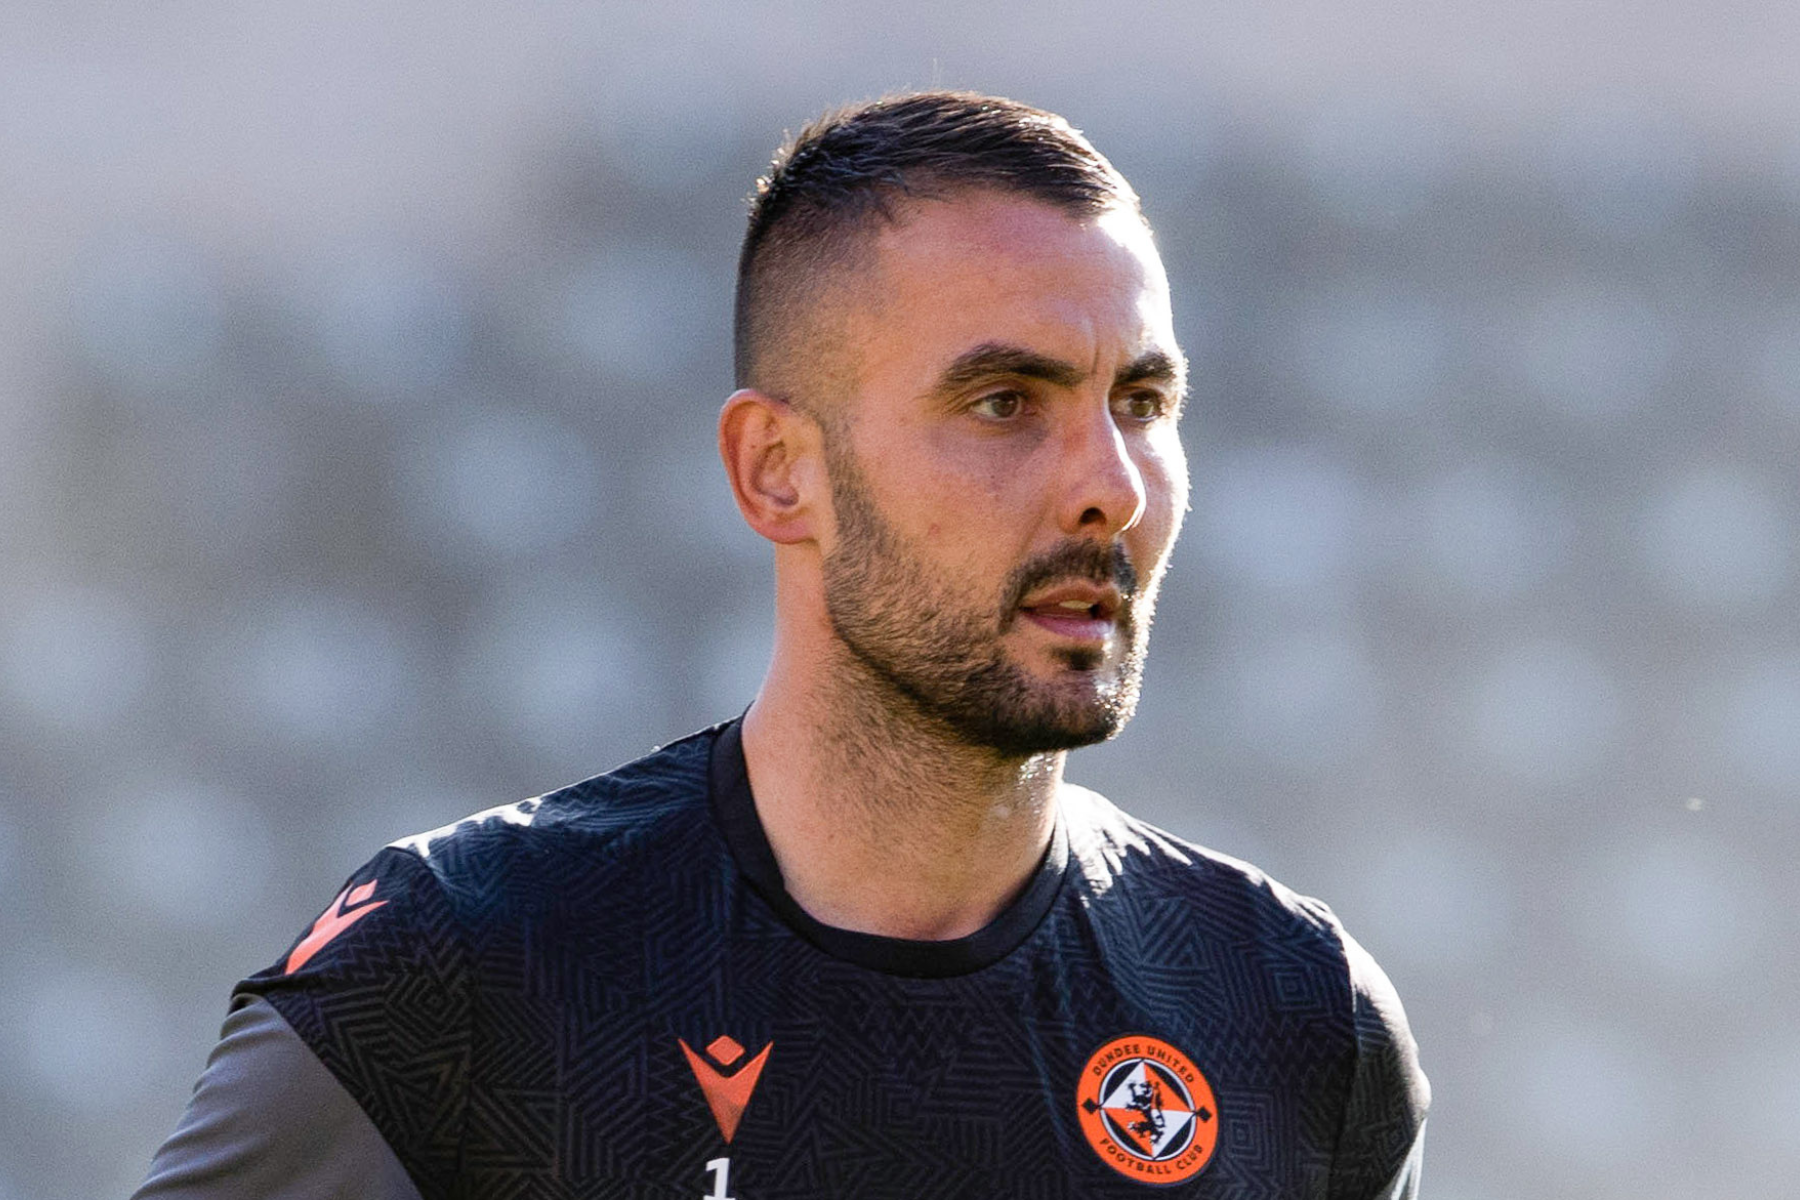 Dundee United keeper joins Kilmarnock on seven-day loan to face Dundee